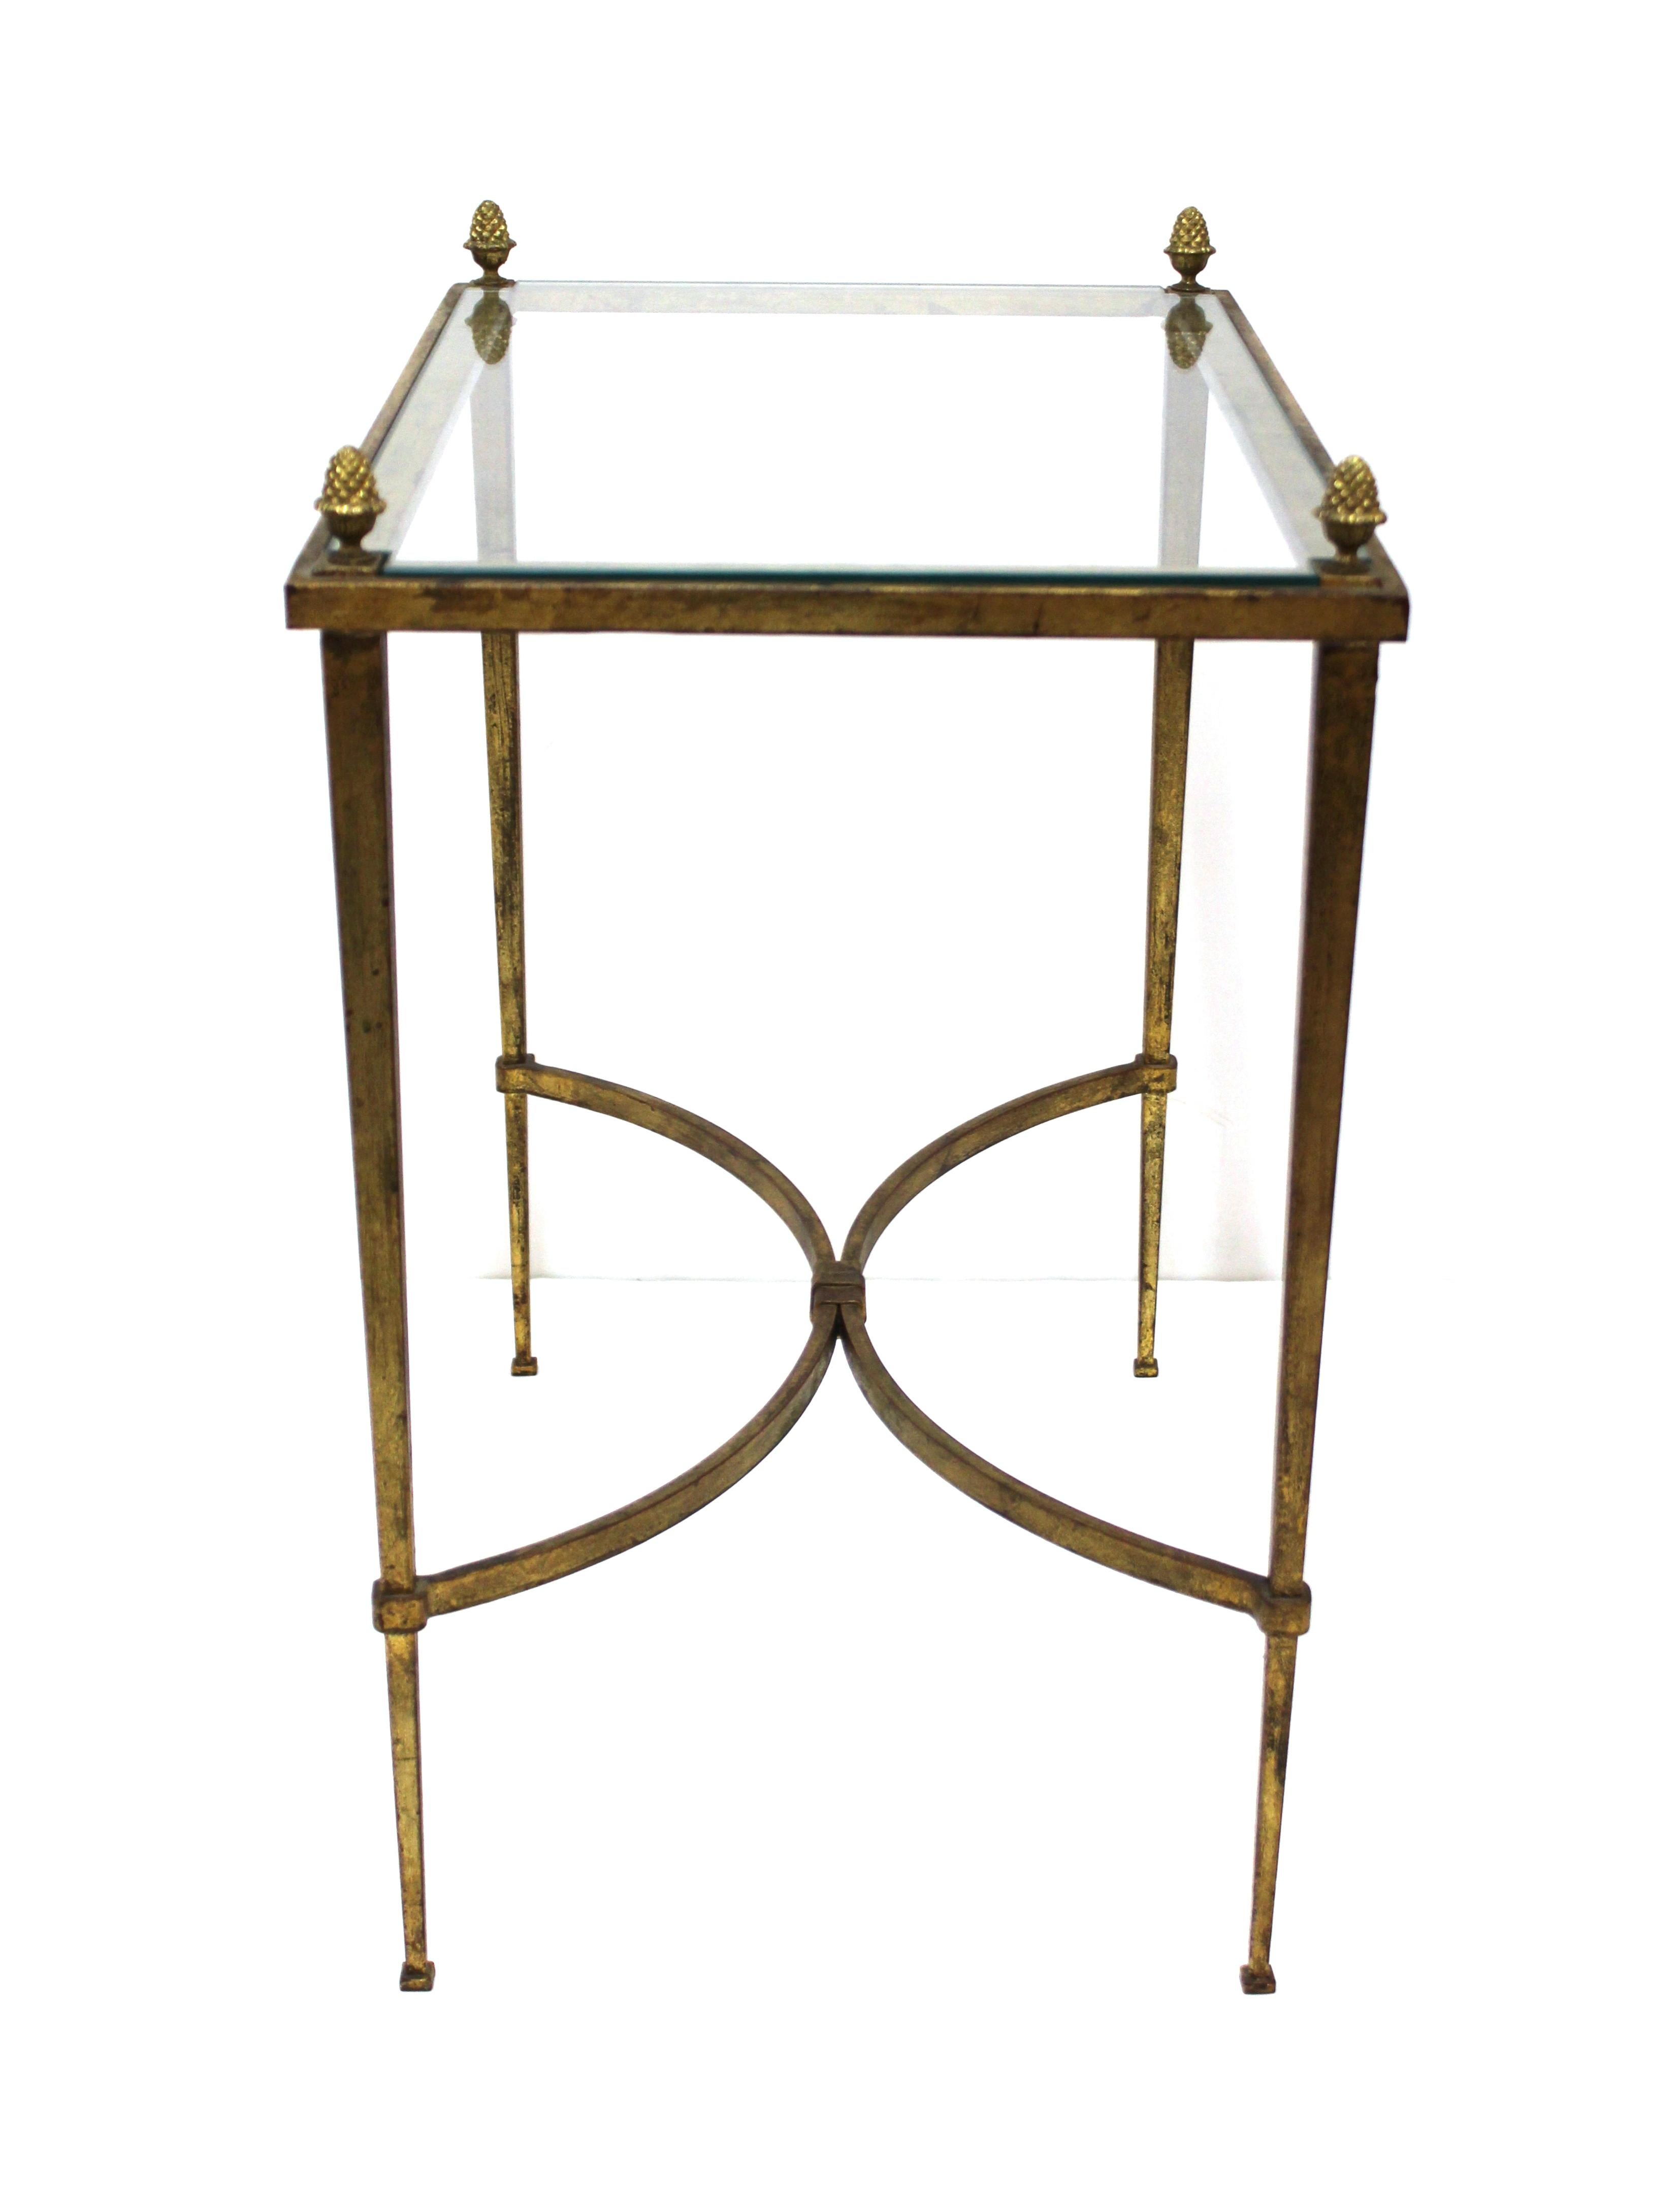 20th Century Maison Baguès French Hollywood Regency End Tables in Gilt Bronze